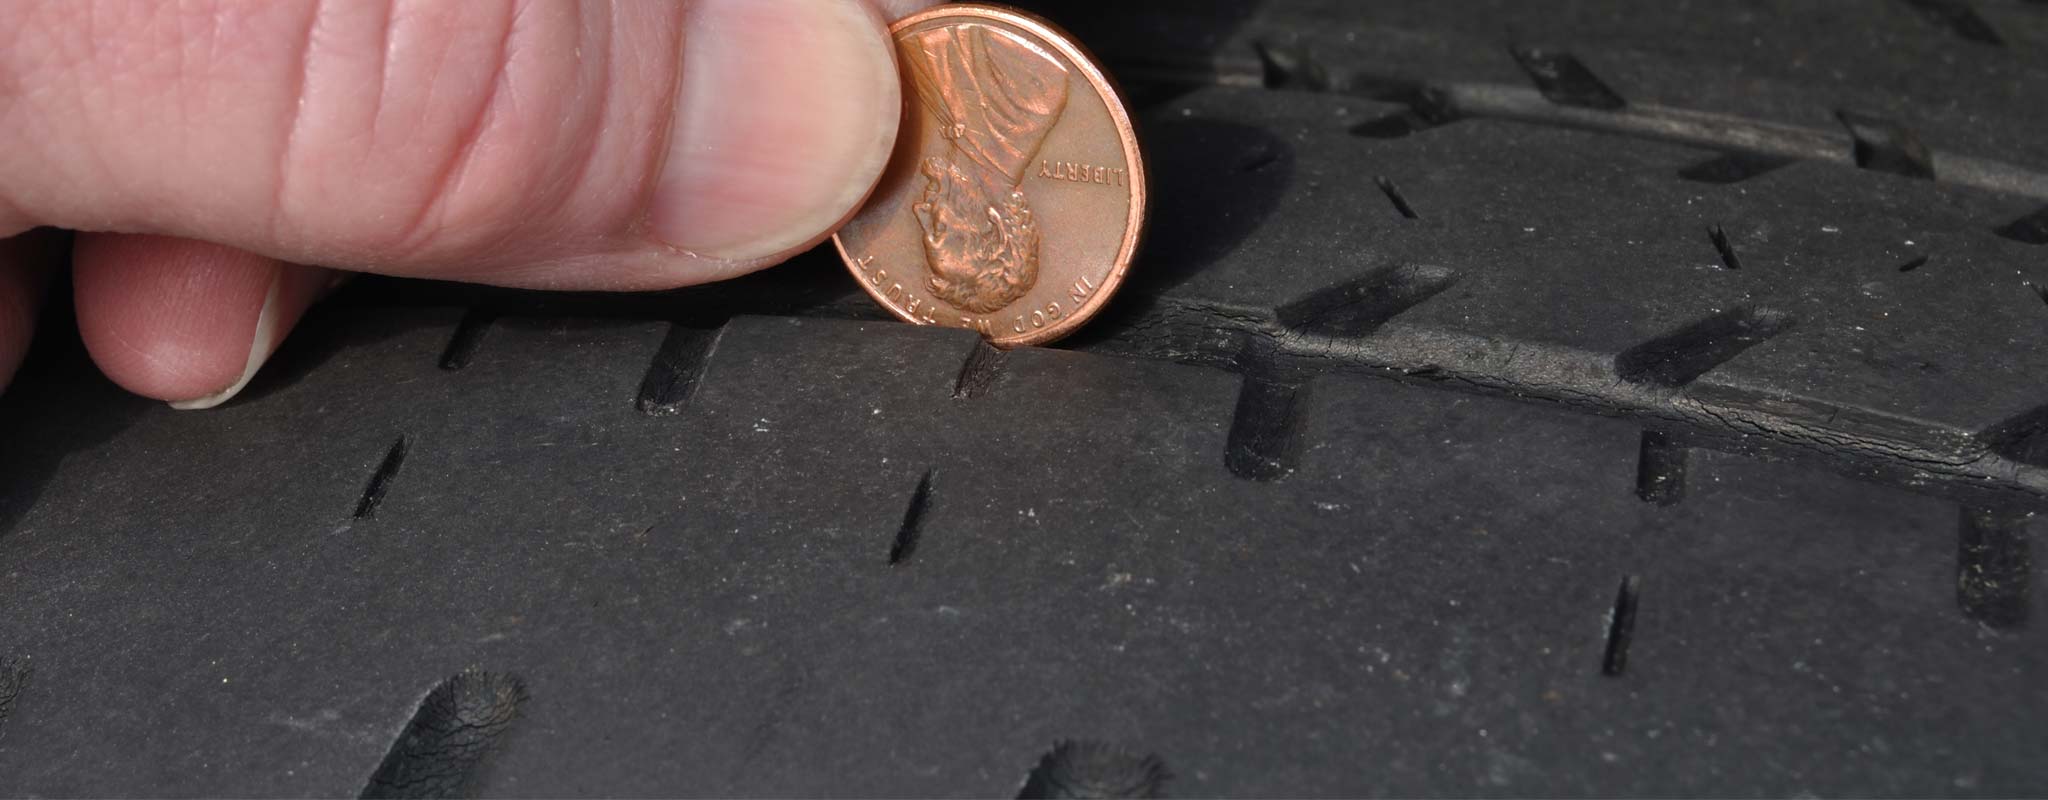 A person checking their tire tread deapth with a penny.